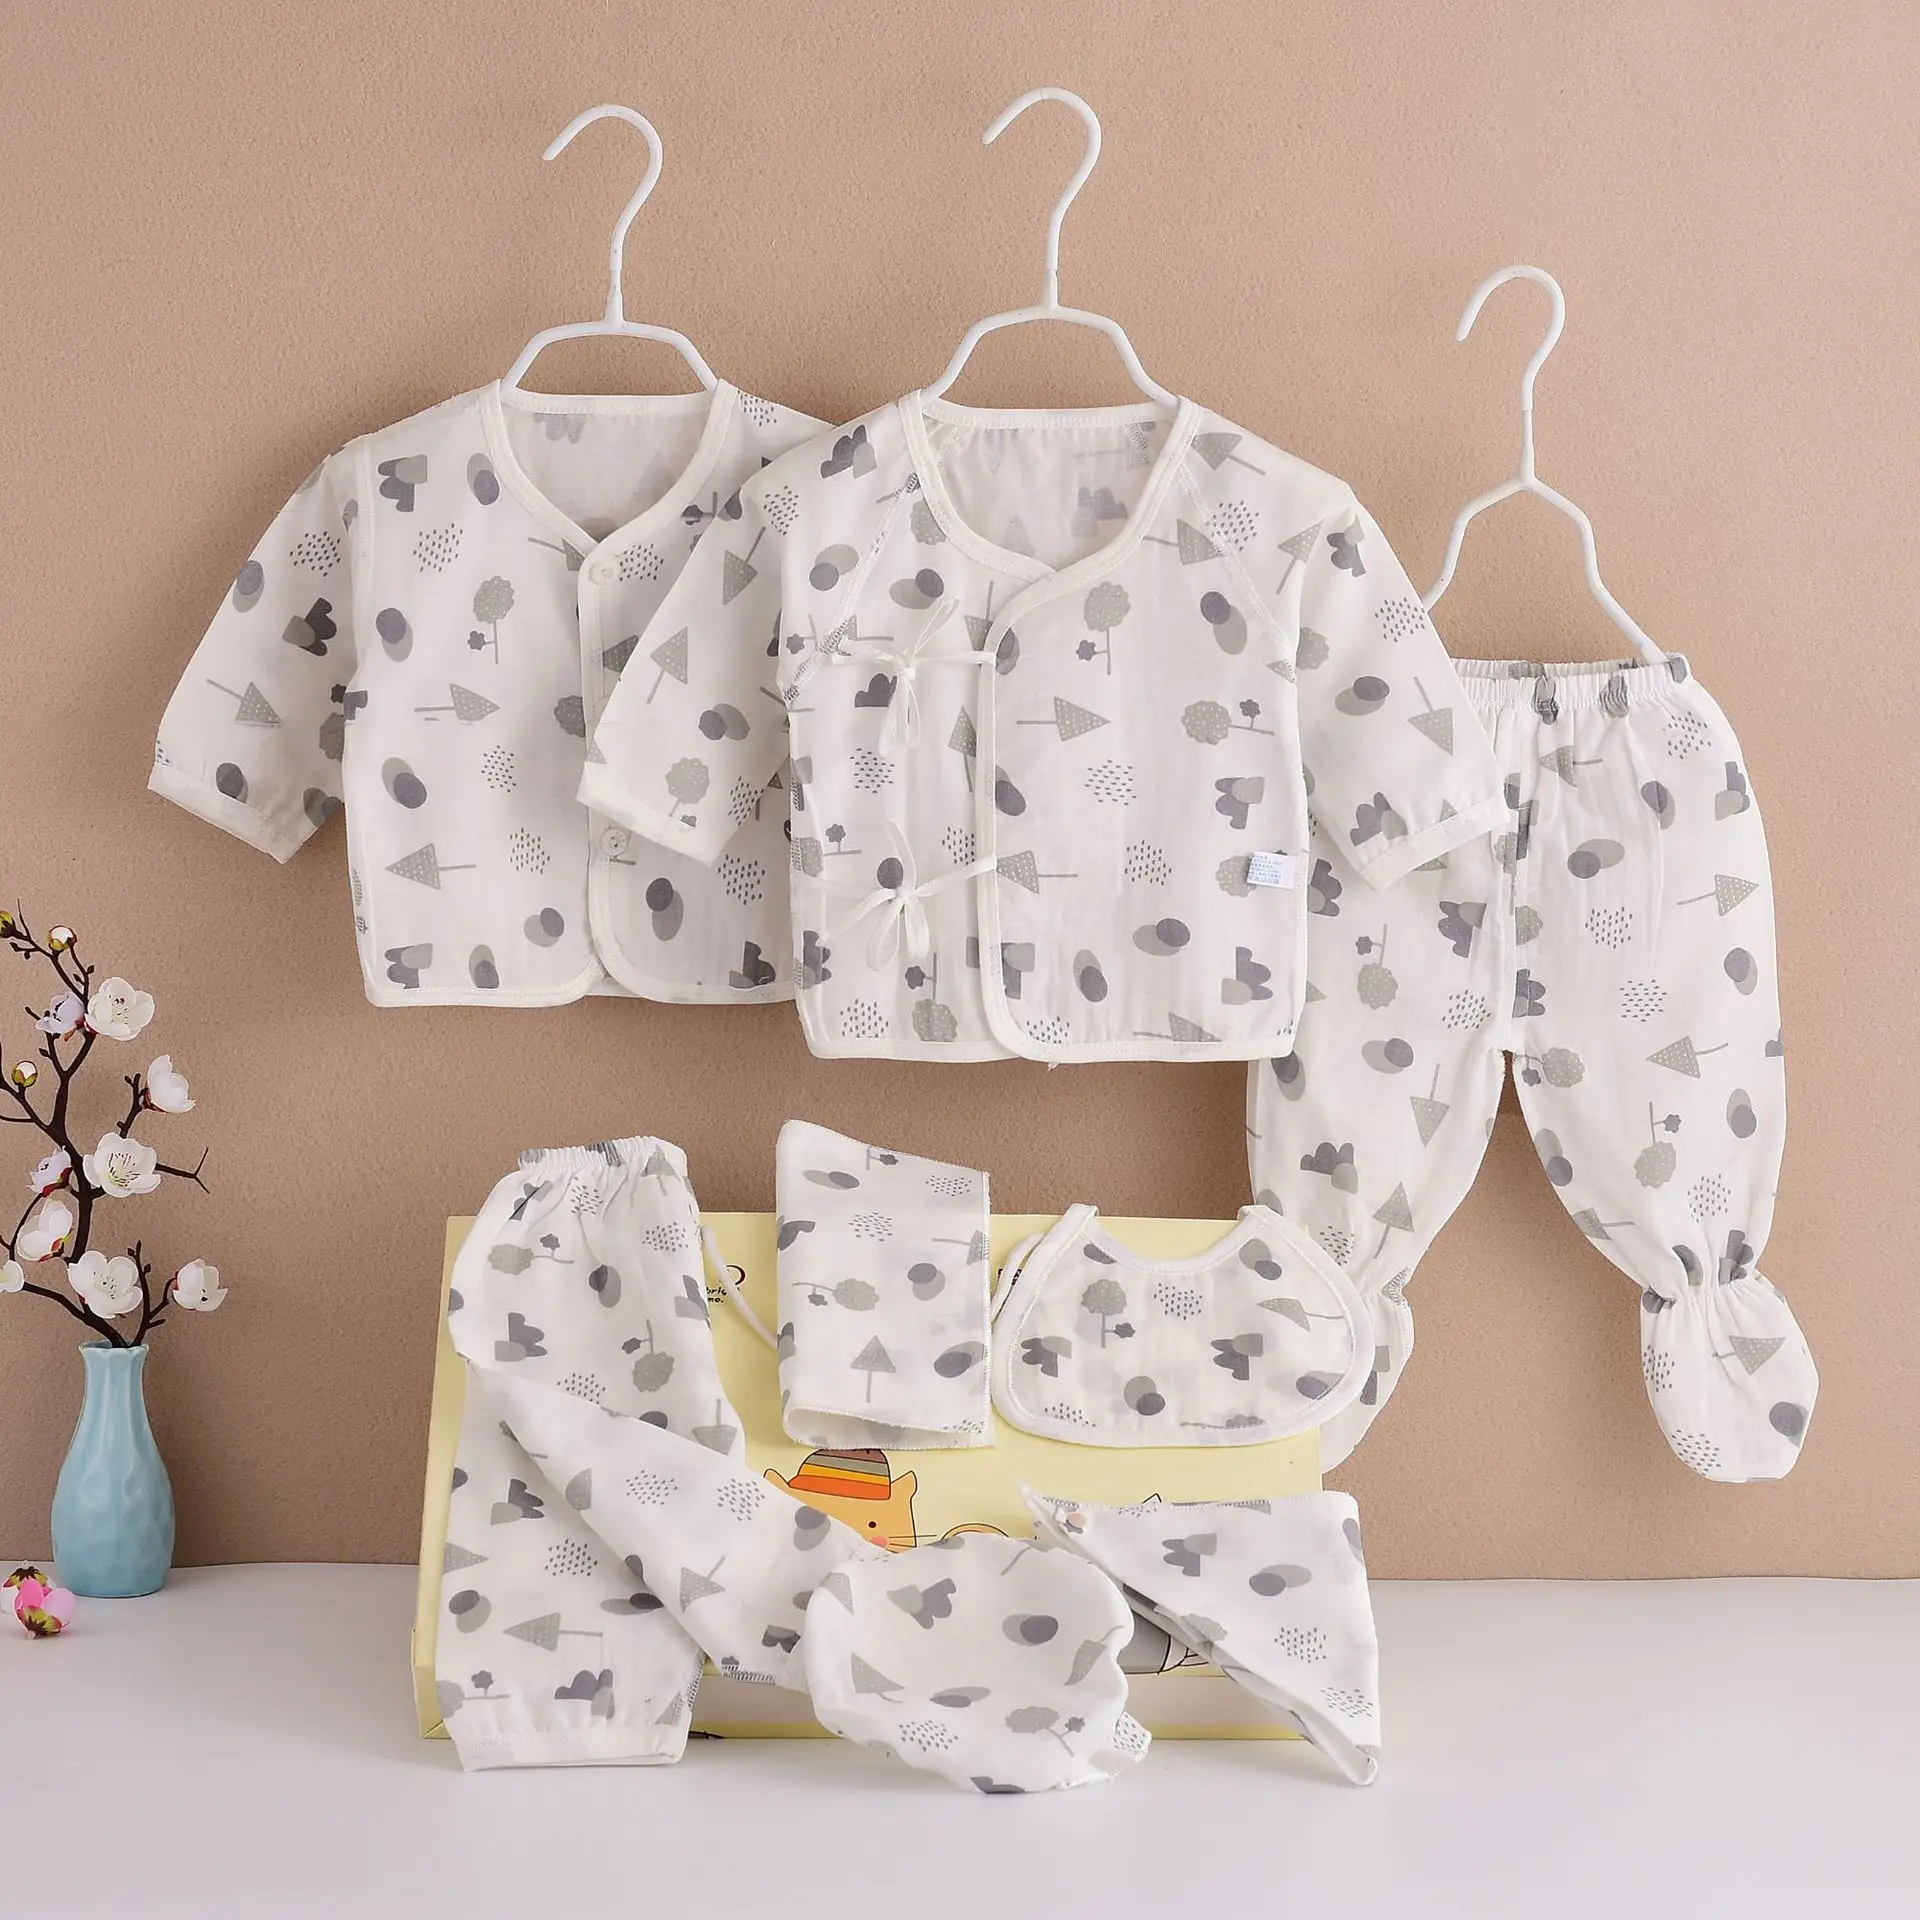 

New Fashion (8pcs/set) Muslin Newborn Baby 0-3M Clothing Set Gift Baby Boy/Girl Clothes 100% Cotton Grooming & Healthcare Kits